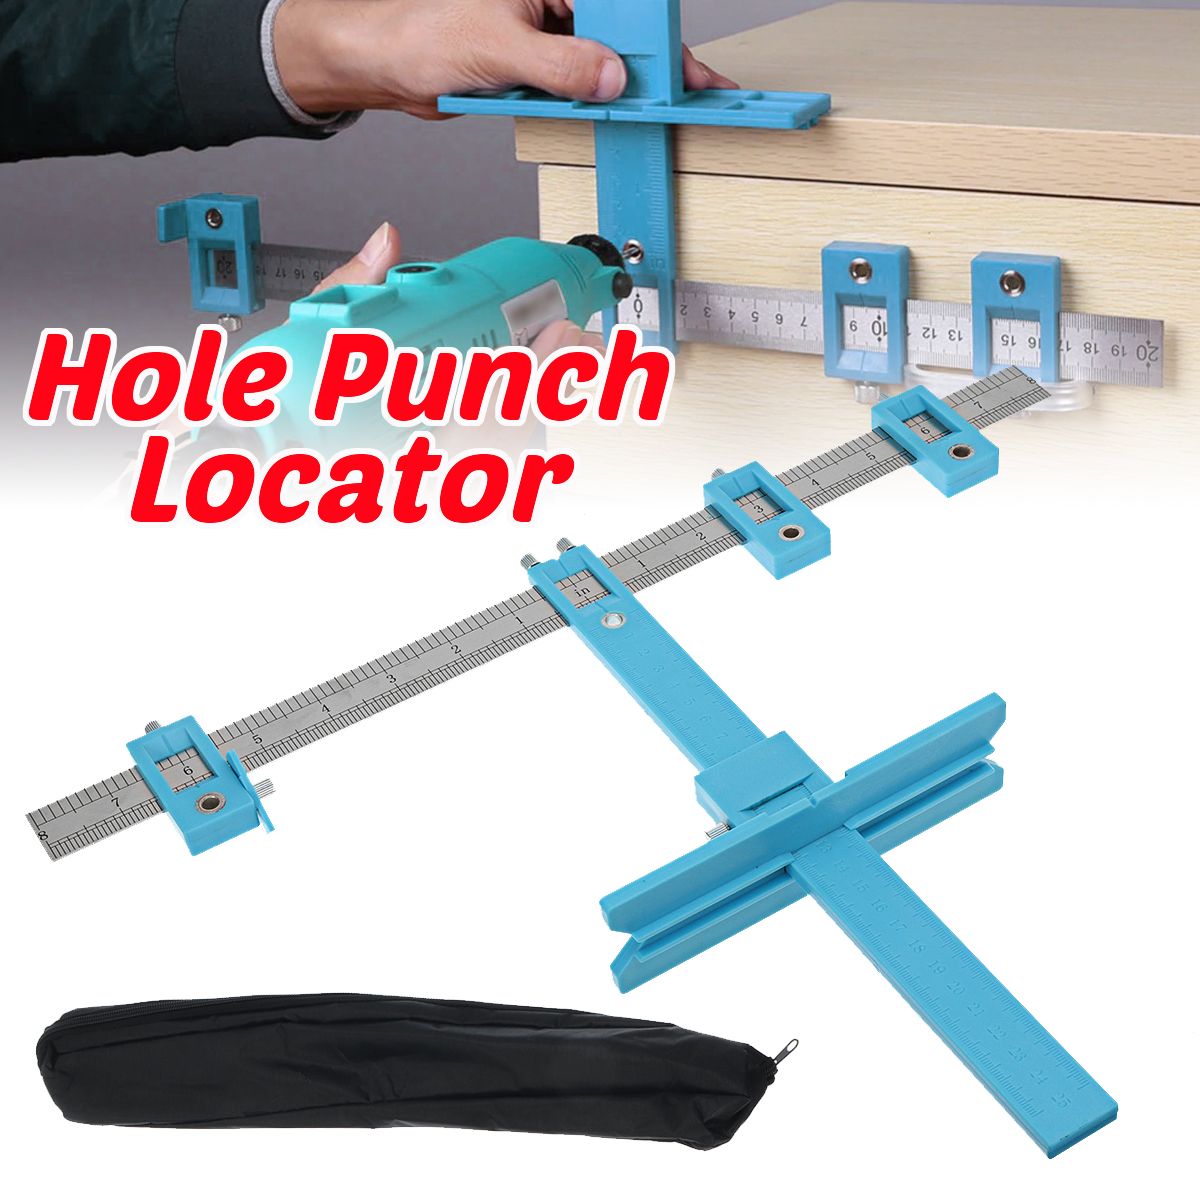 Hole-Punch-Locator-Jig-Tool-Drill-Guide-Drawer-Cabinet-Hardware-Dowel-Woodworking-Ruler-1712431